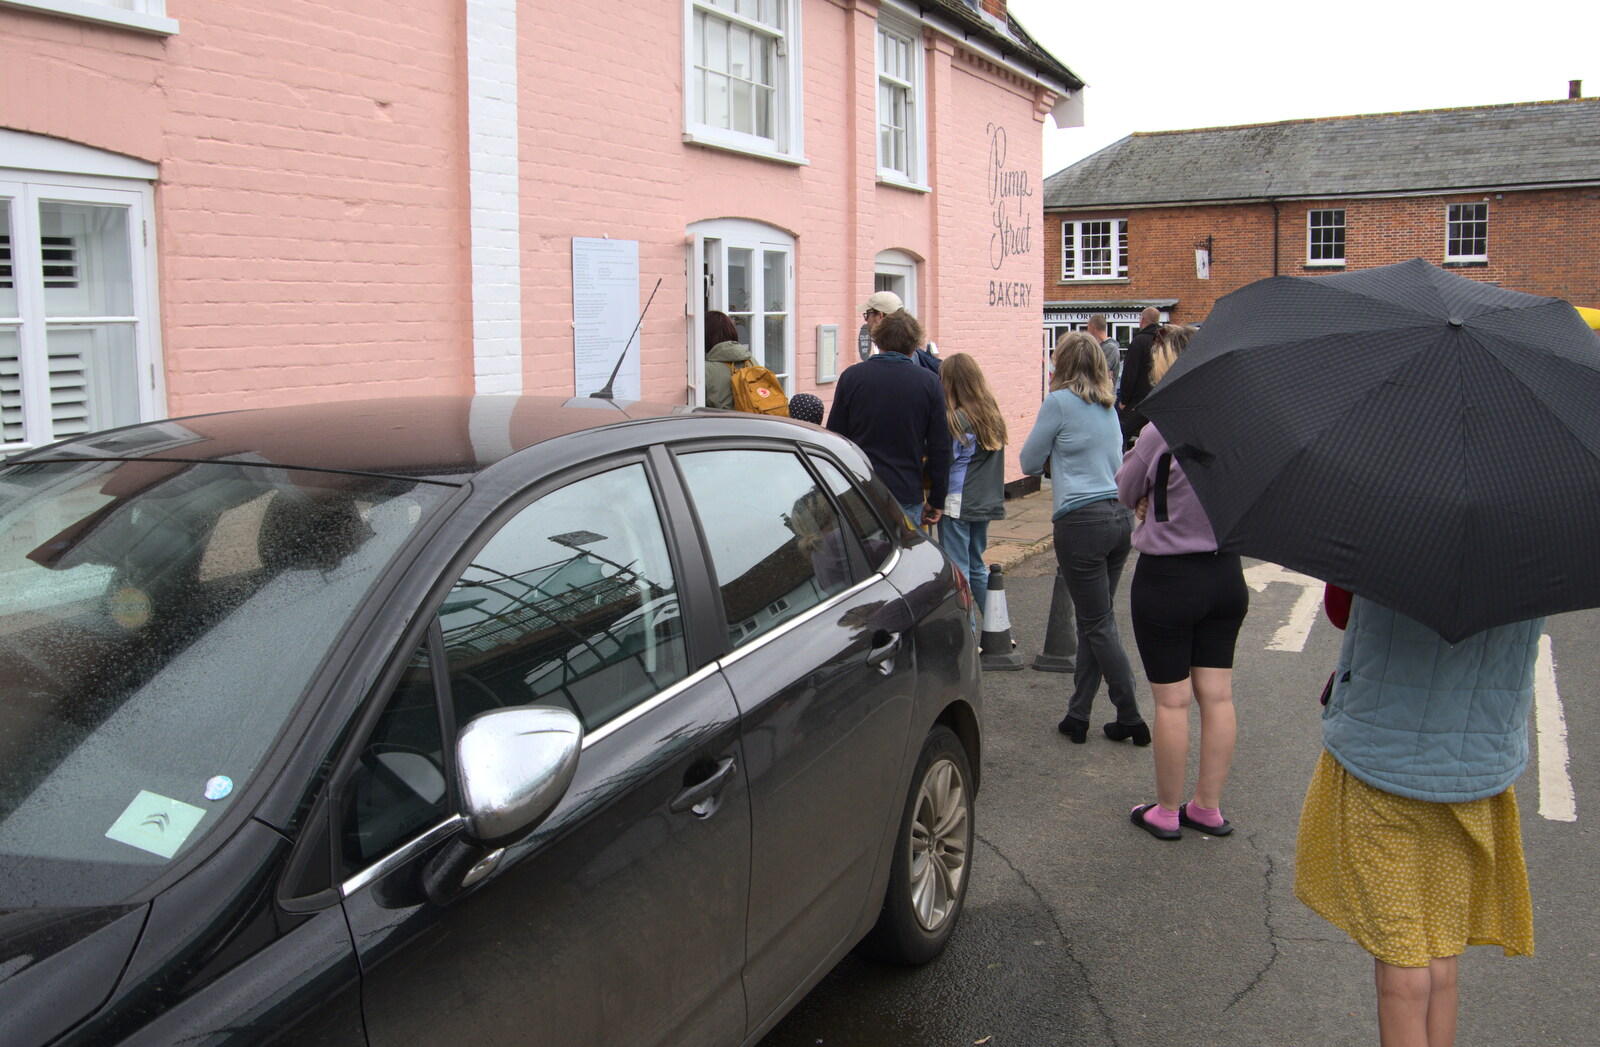 There's a queue for the bakery from A Trip to Orford, Suffolk - 29th August 2020